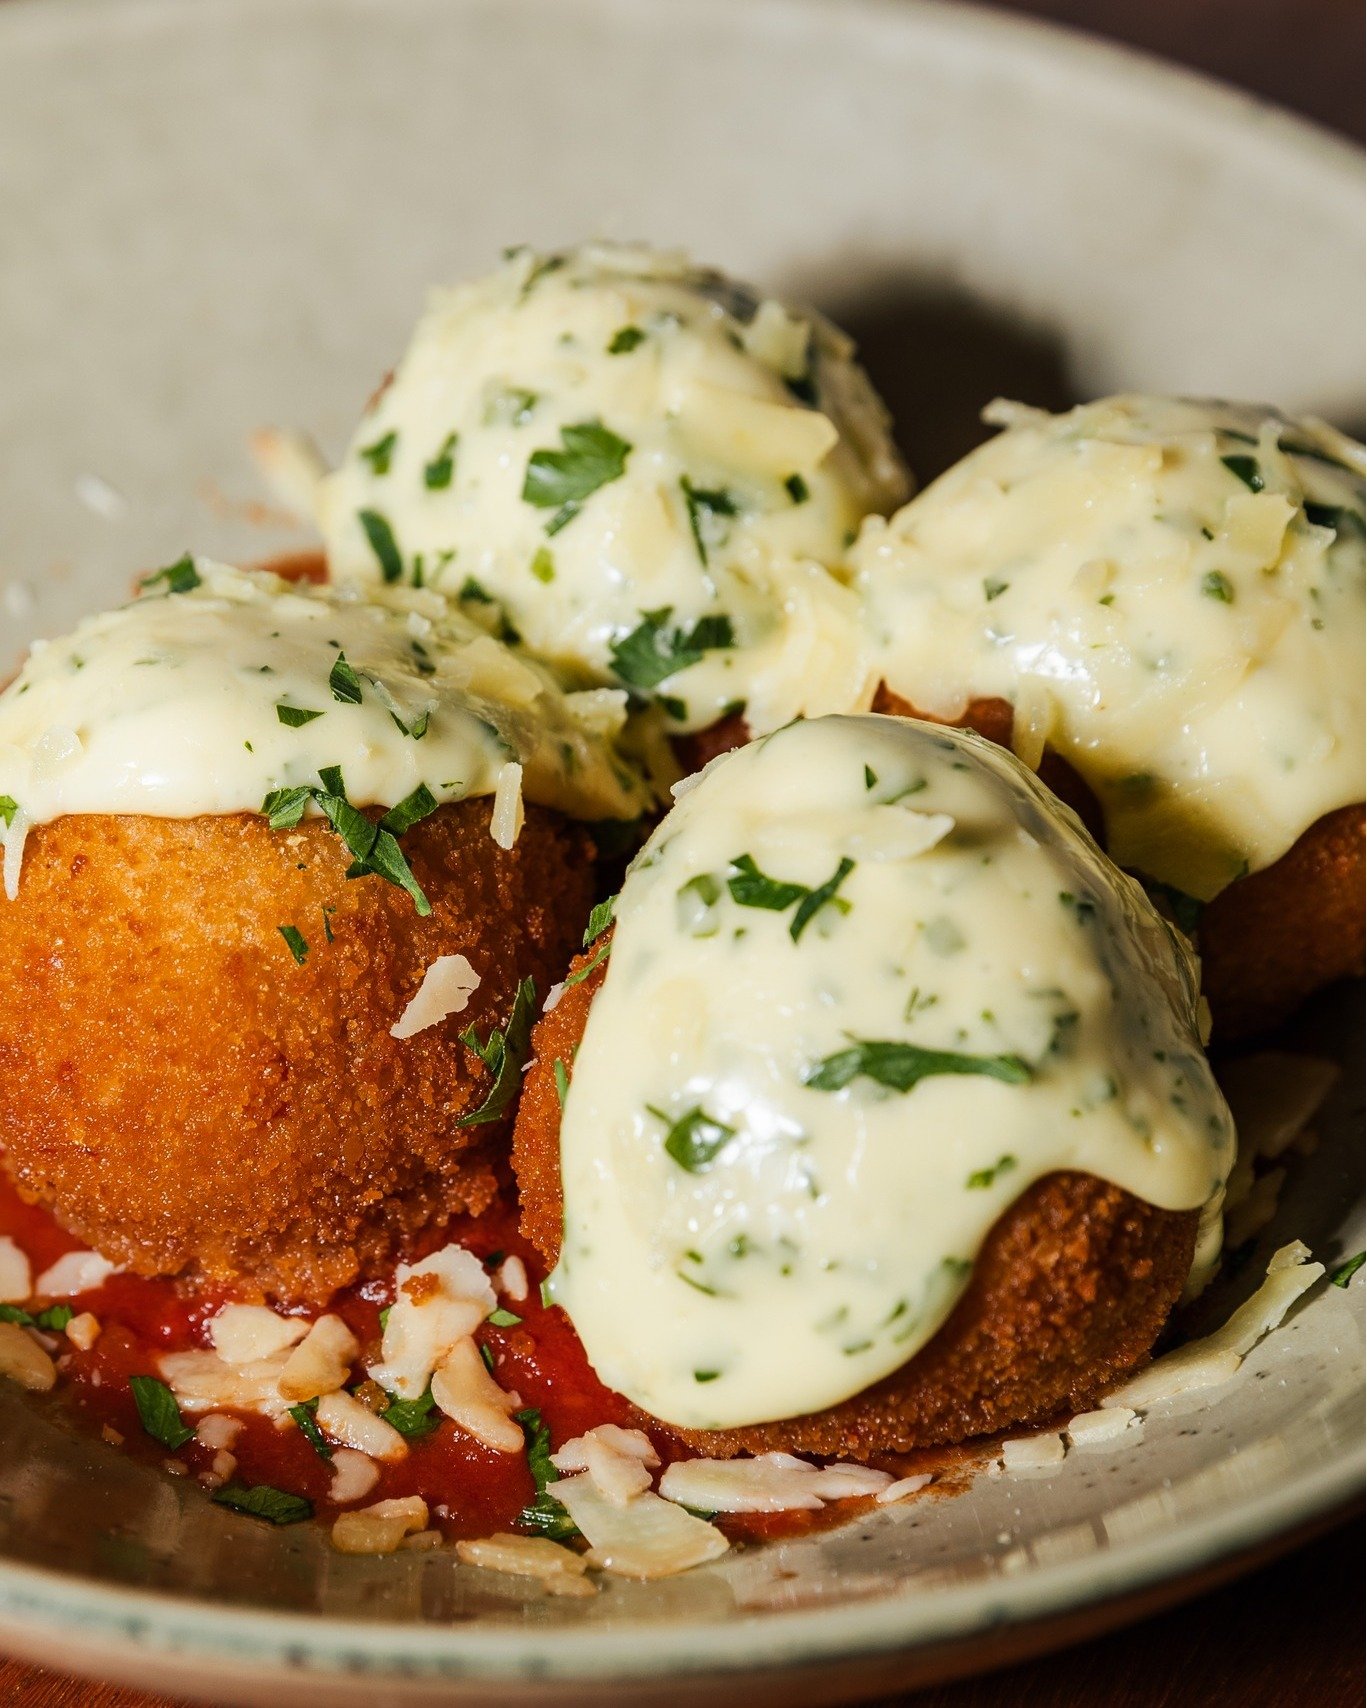 Our arancini balls come two different ways!

🤍 Bolognaise Arancini with aioli
🤍 Vegan Pumpkin Arancini with nap sauce

What's your pick?